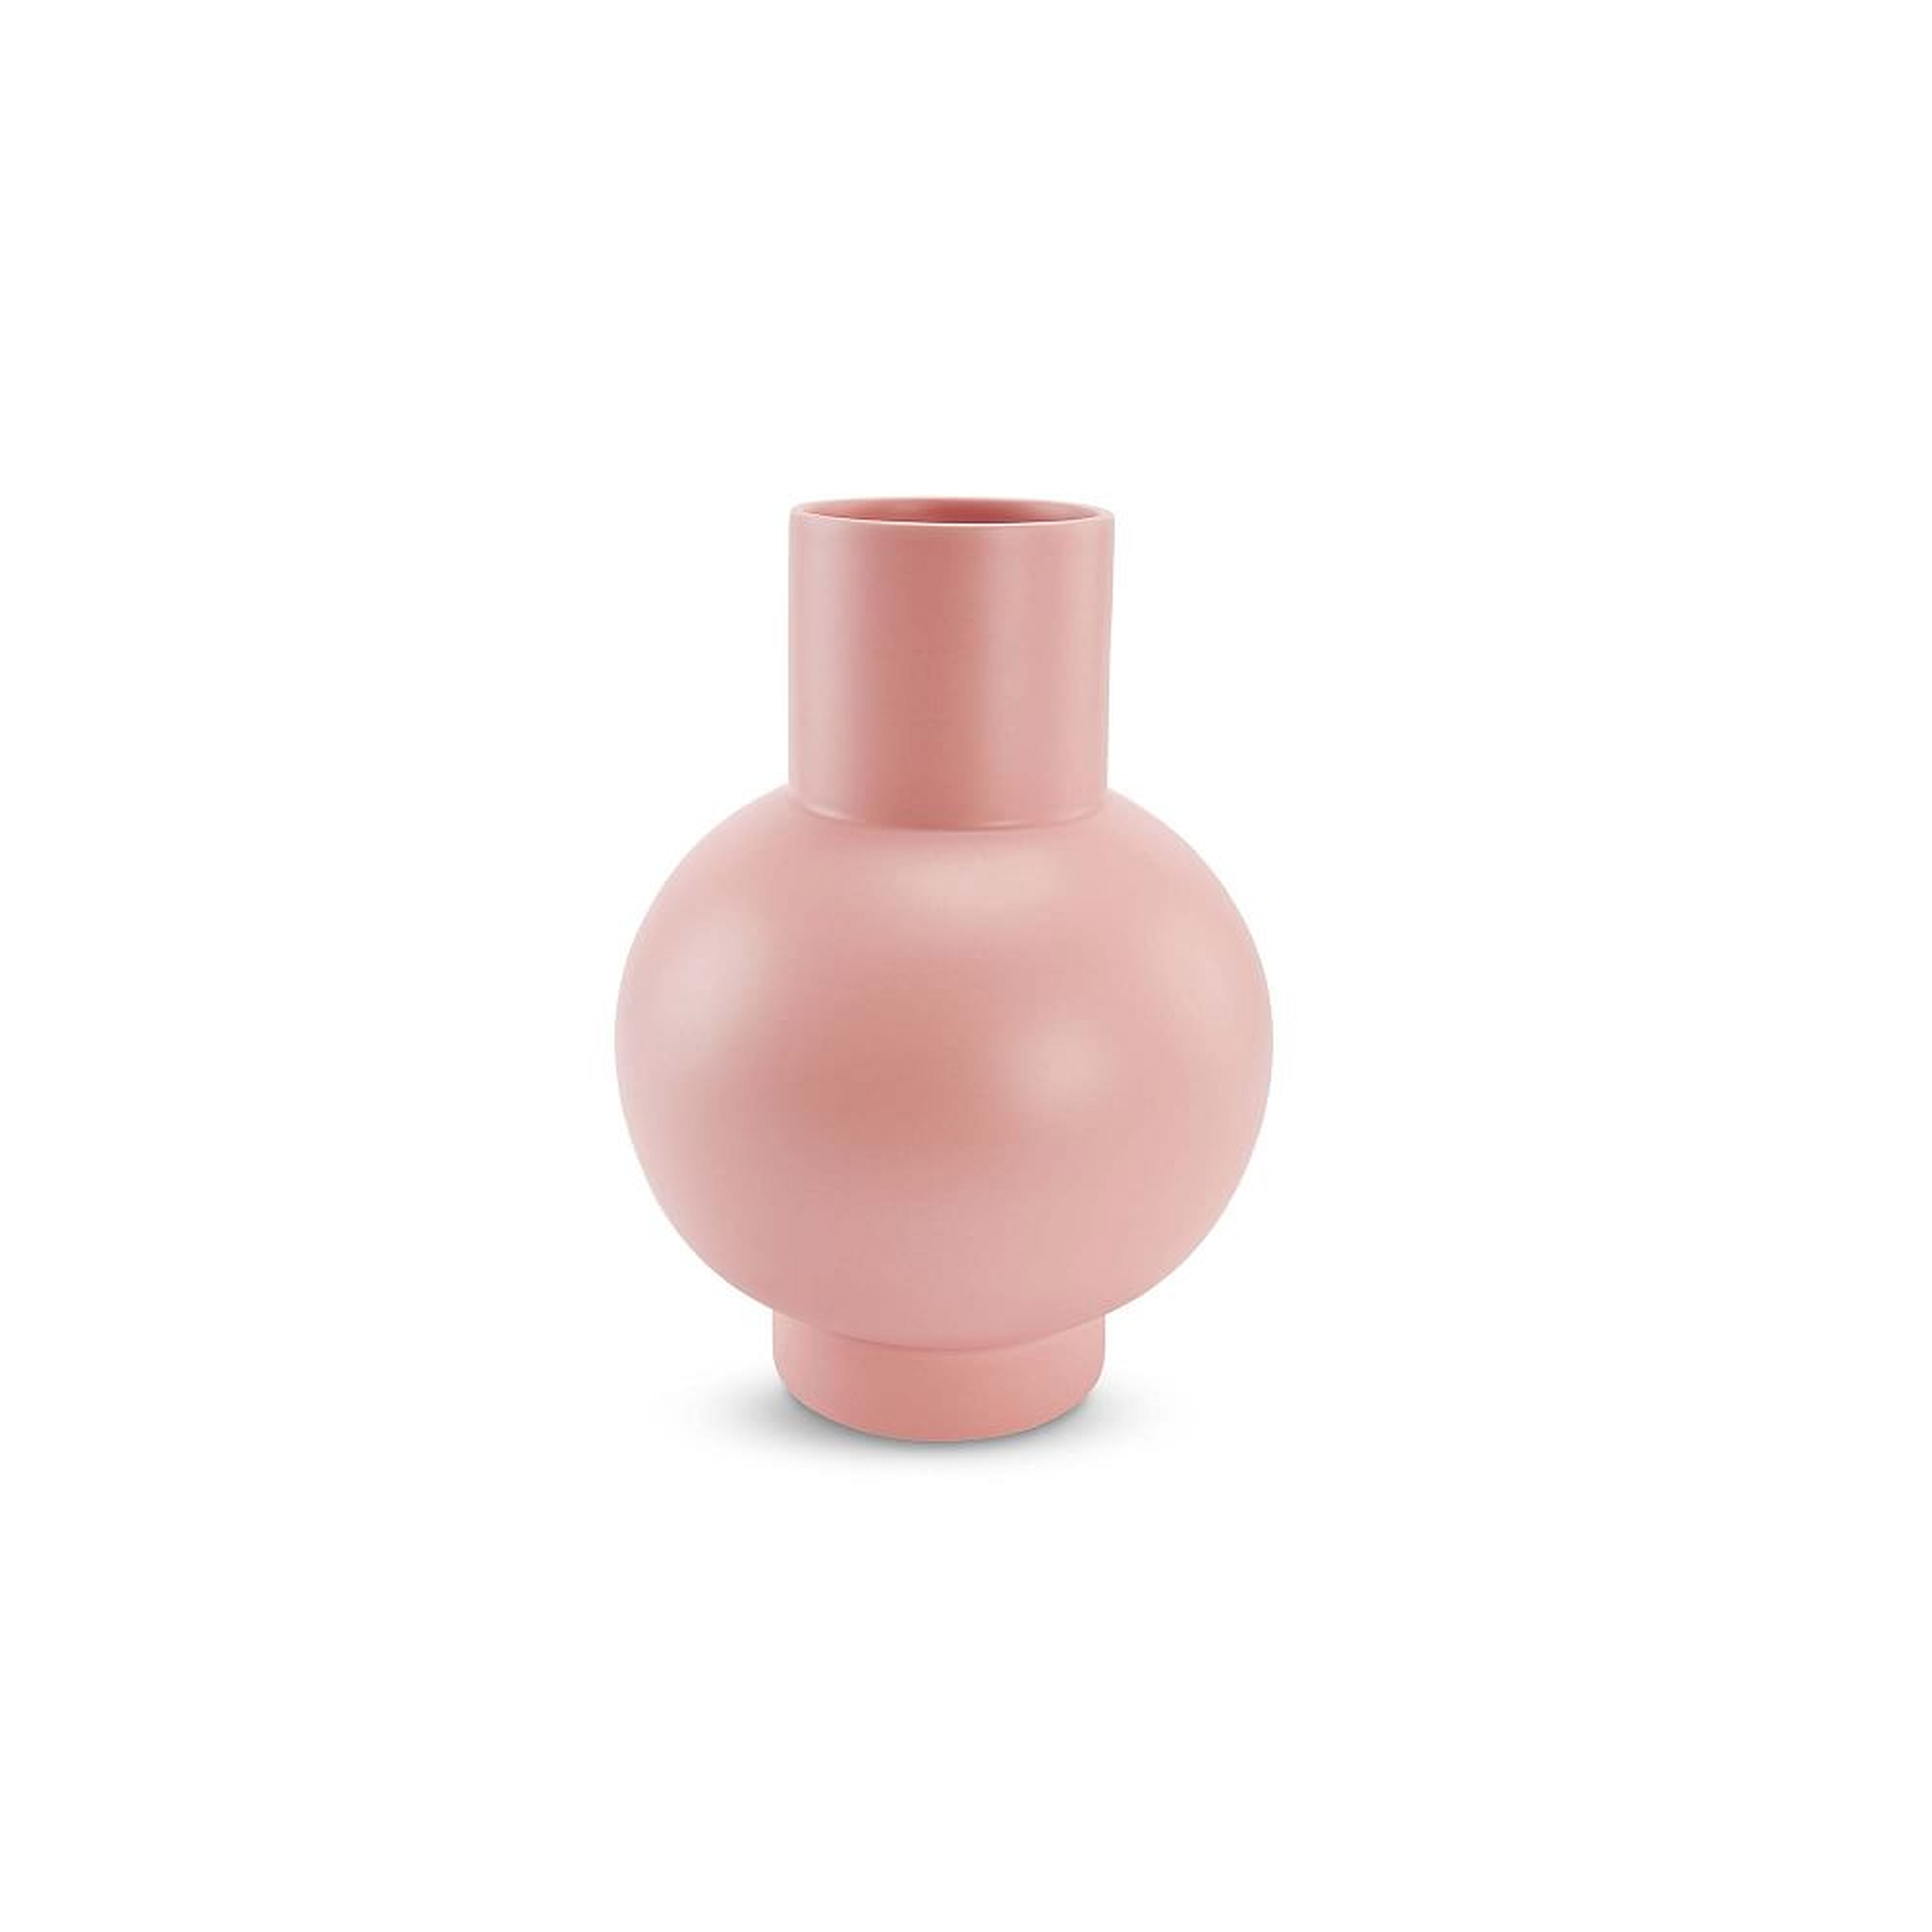 MoMA Raawii Strom Ceramic Vase, Small, Coral Blush - West Elm